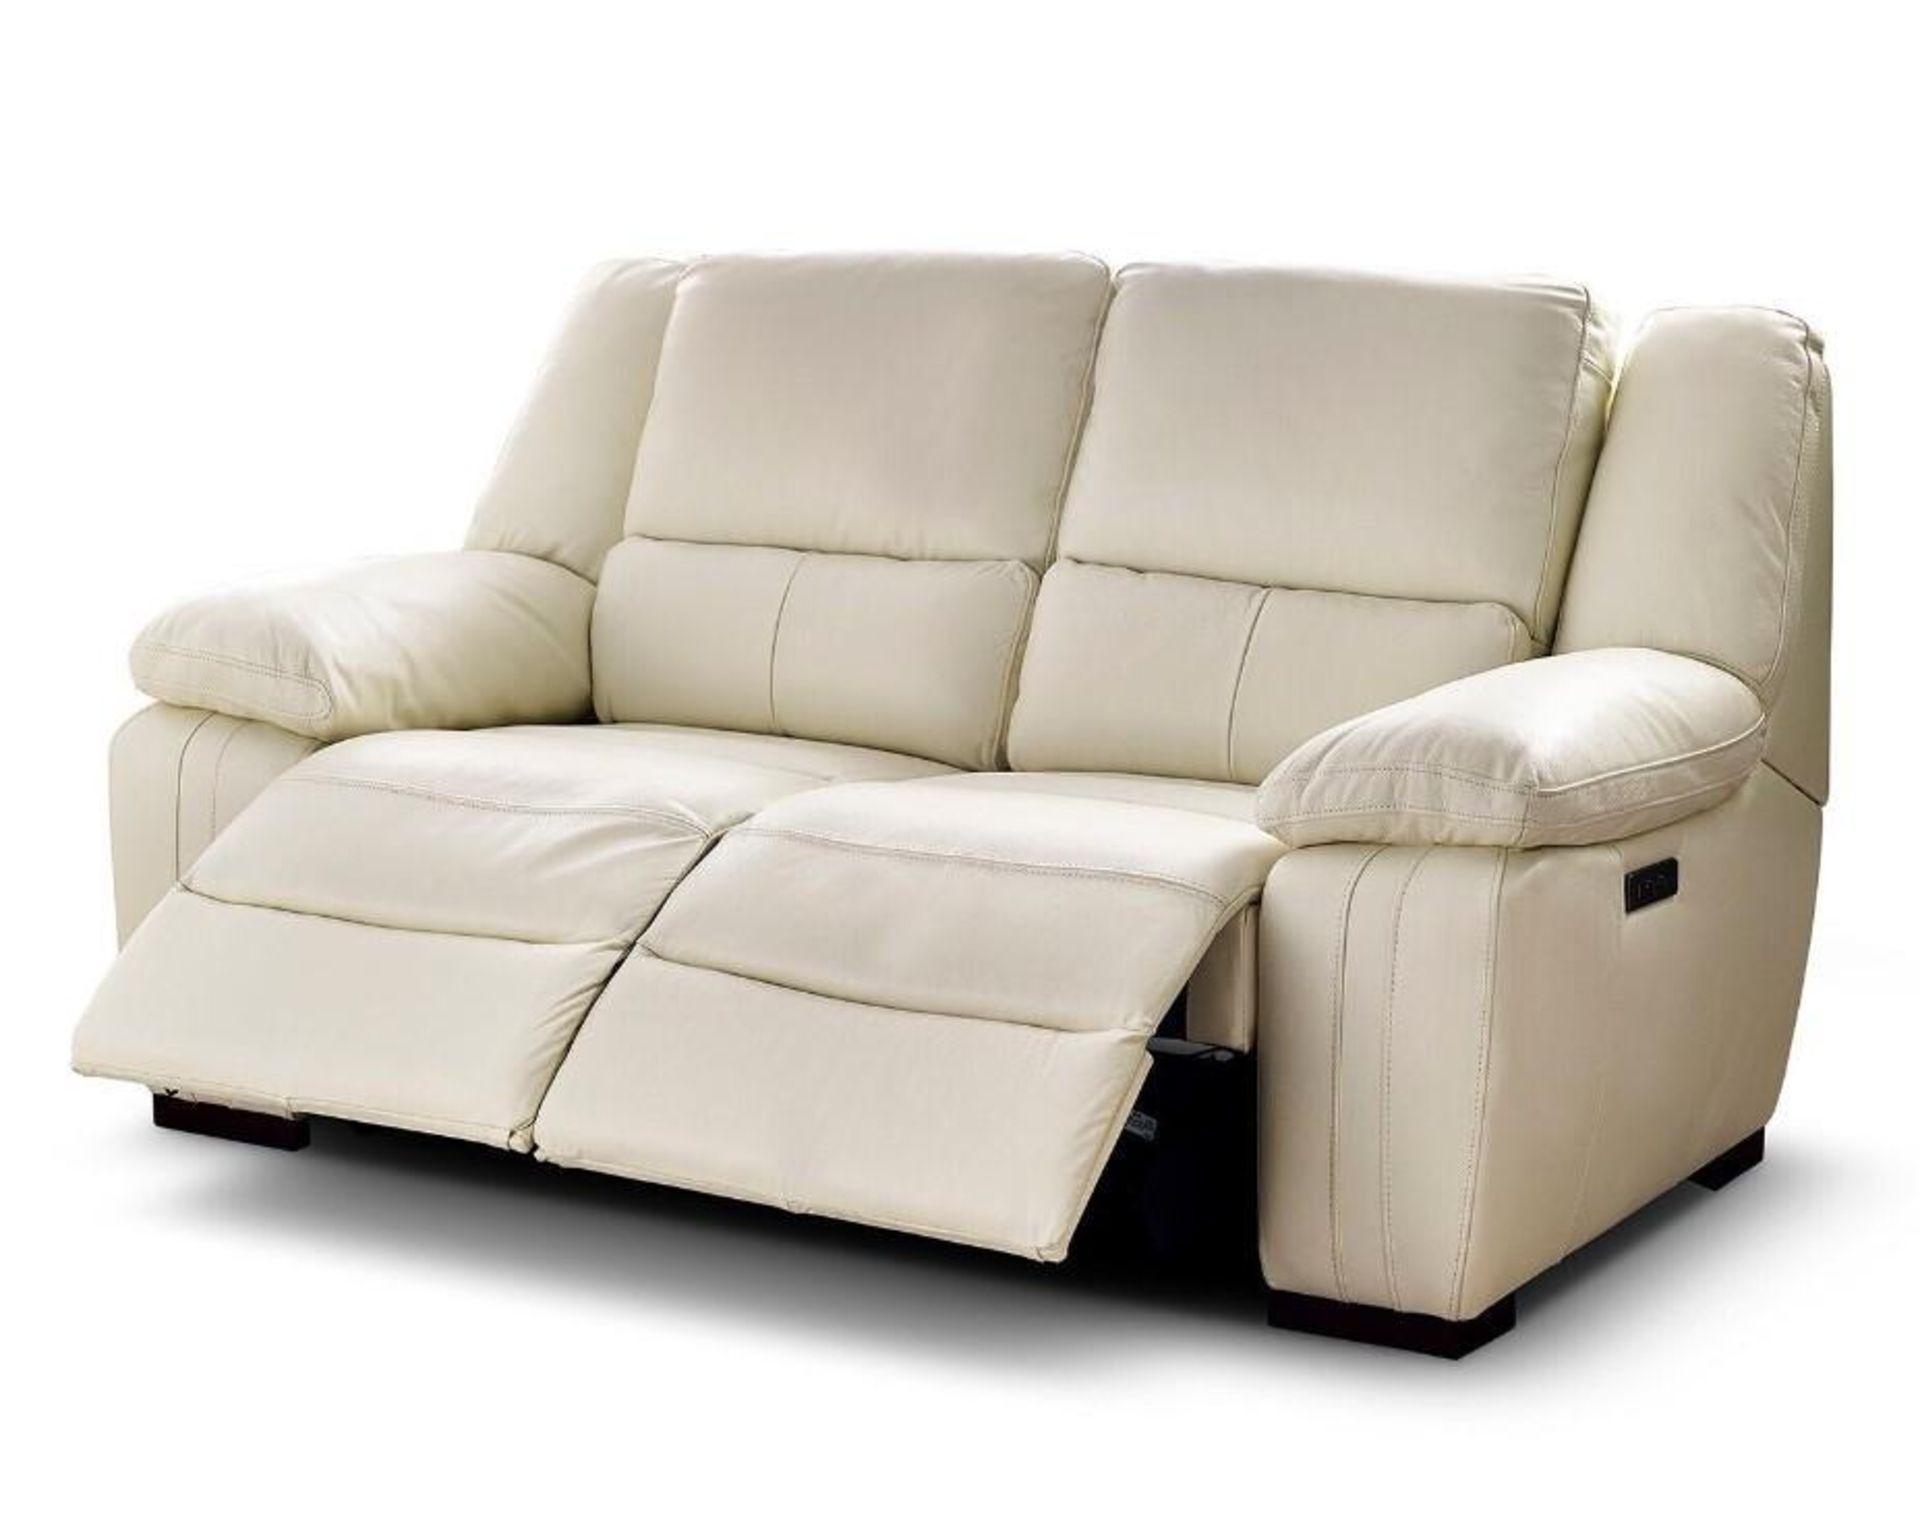 Brand new and boxed SCS Fallon 2 seater electric reclining sofa in Cream. - Bild 3 aus 7